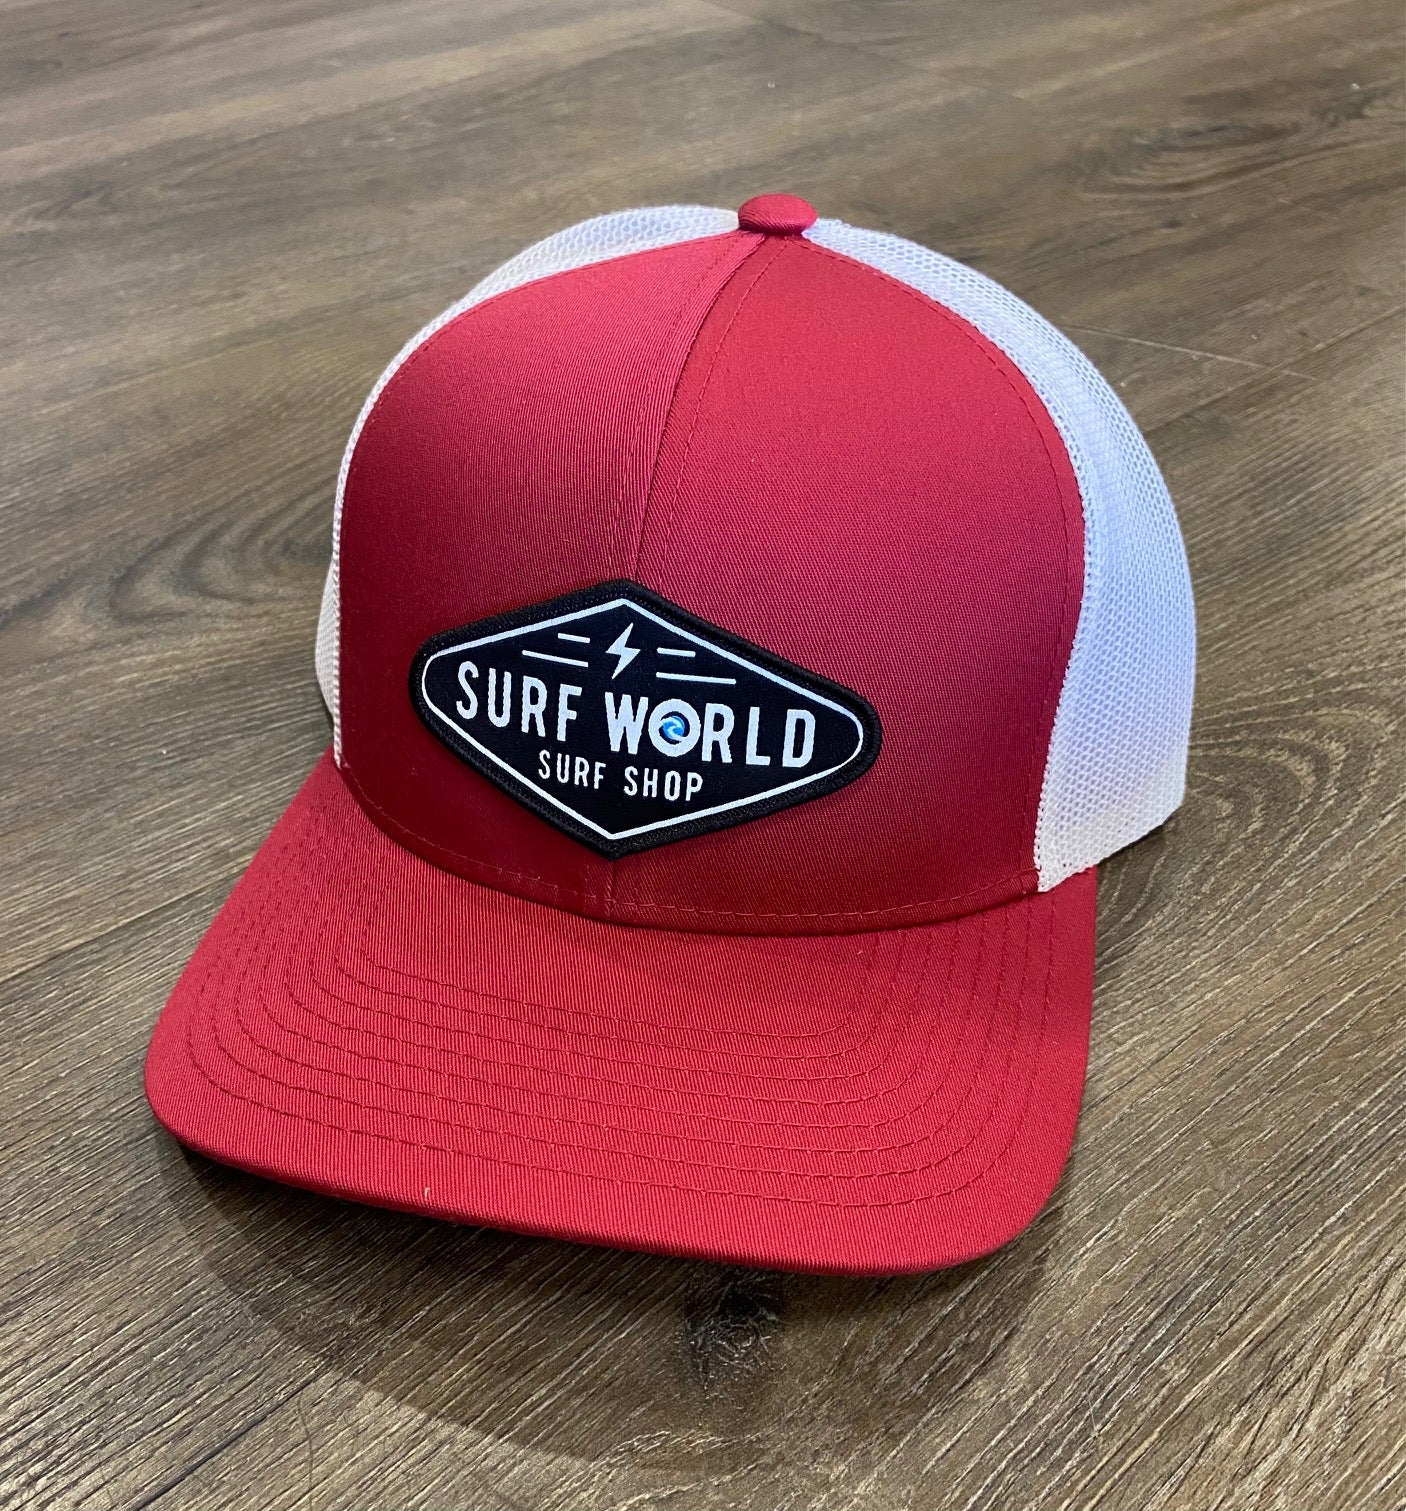 Surf World Retro Trucker Hat - Boltz- Multiple colors Mens Hat Washed Maroon